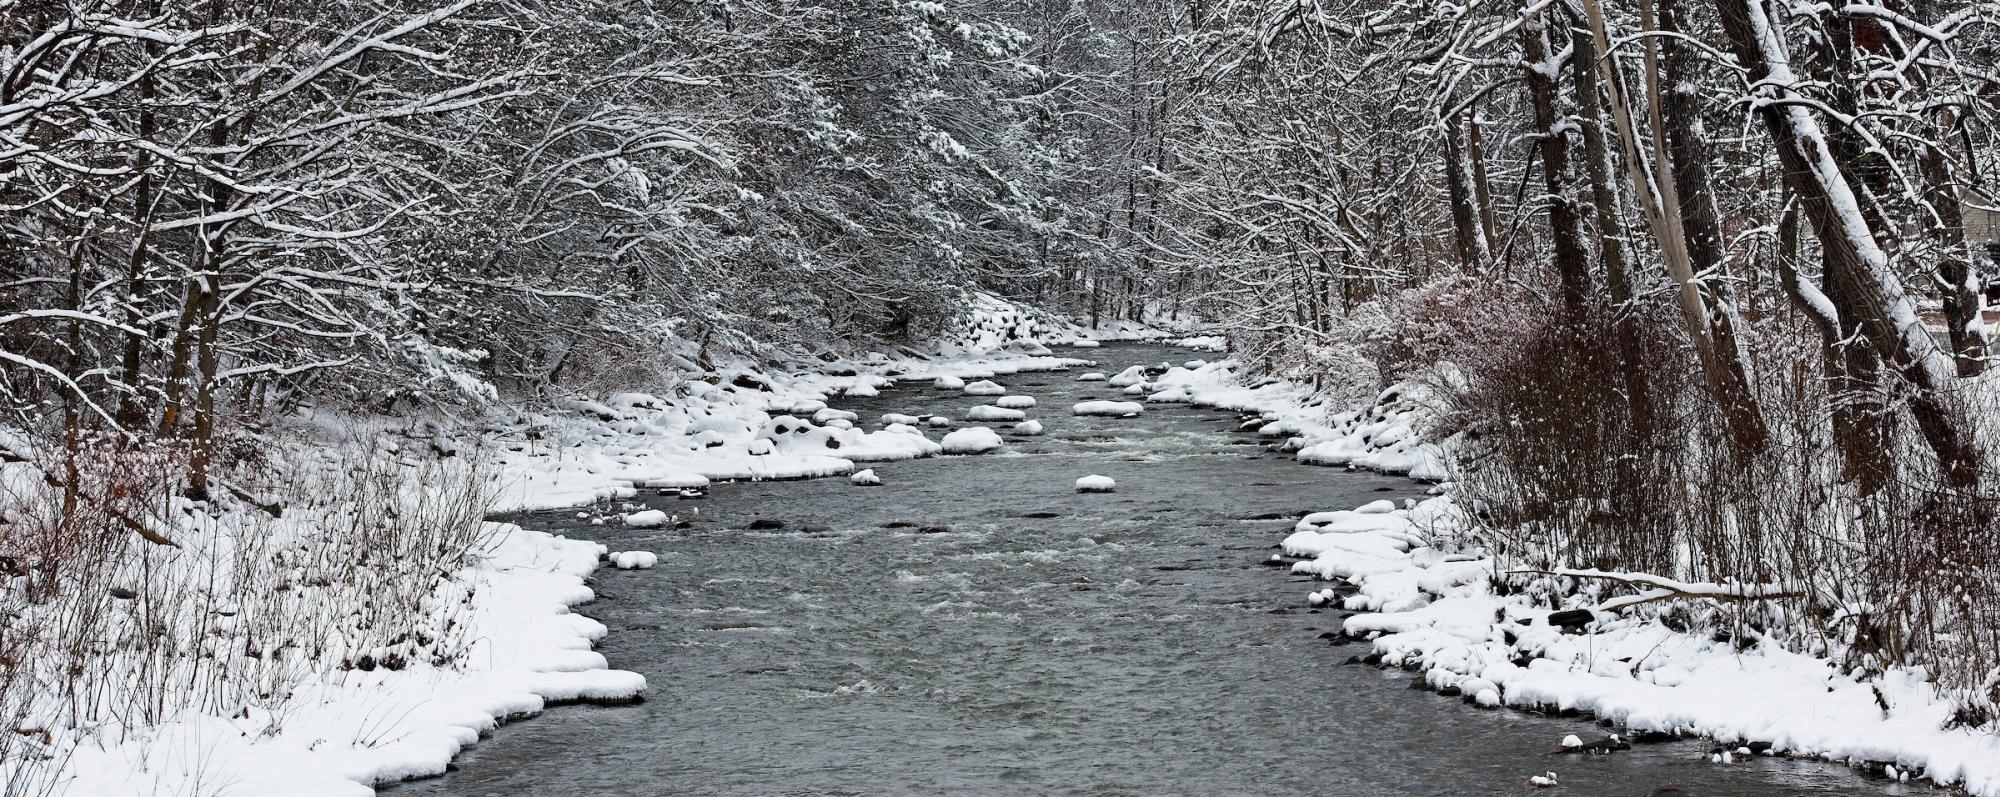 View up Stoney Clove Creek in the Hamlet of Phoenicia in winter, Ulster County, Catskills